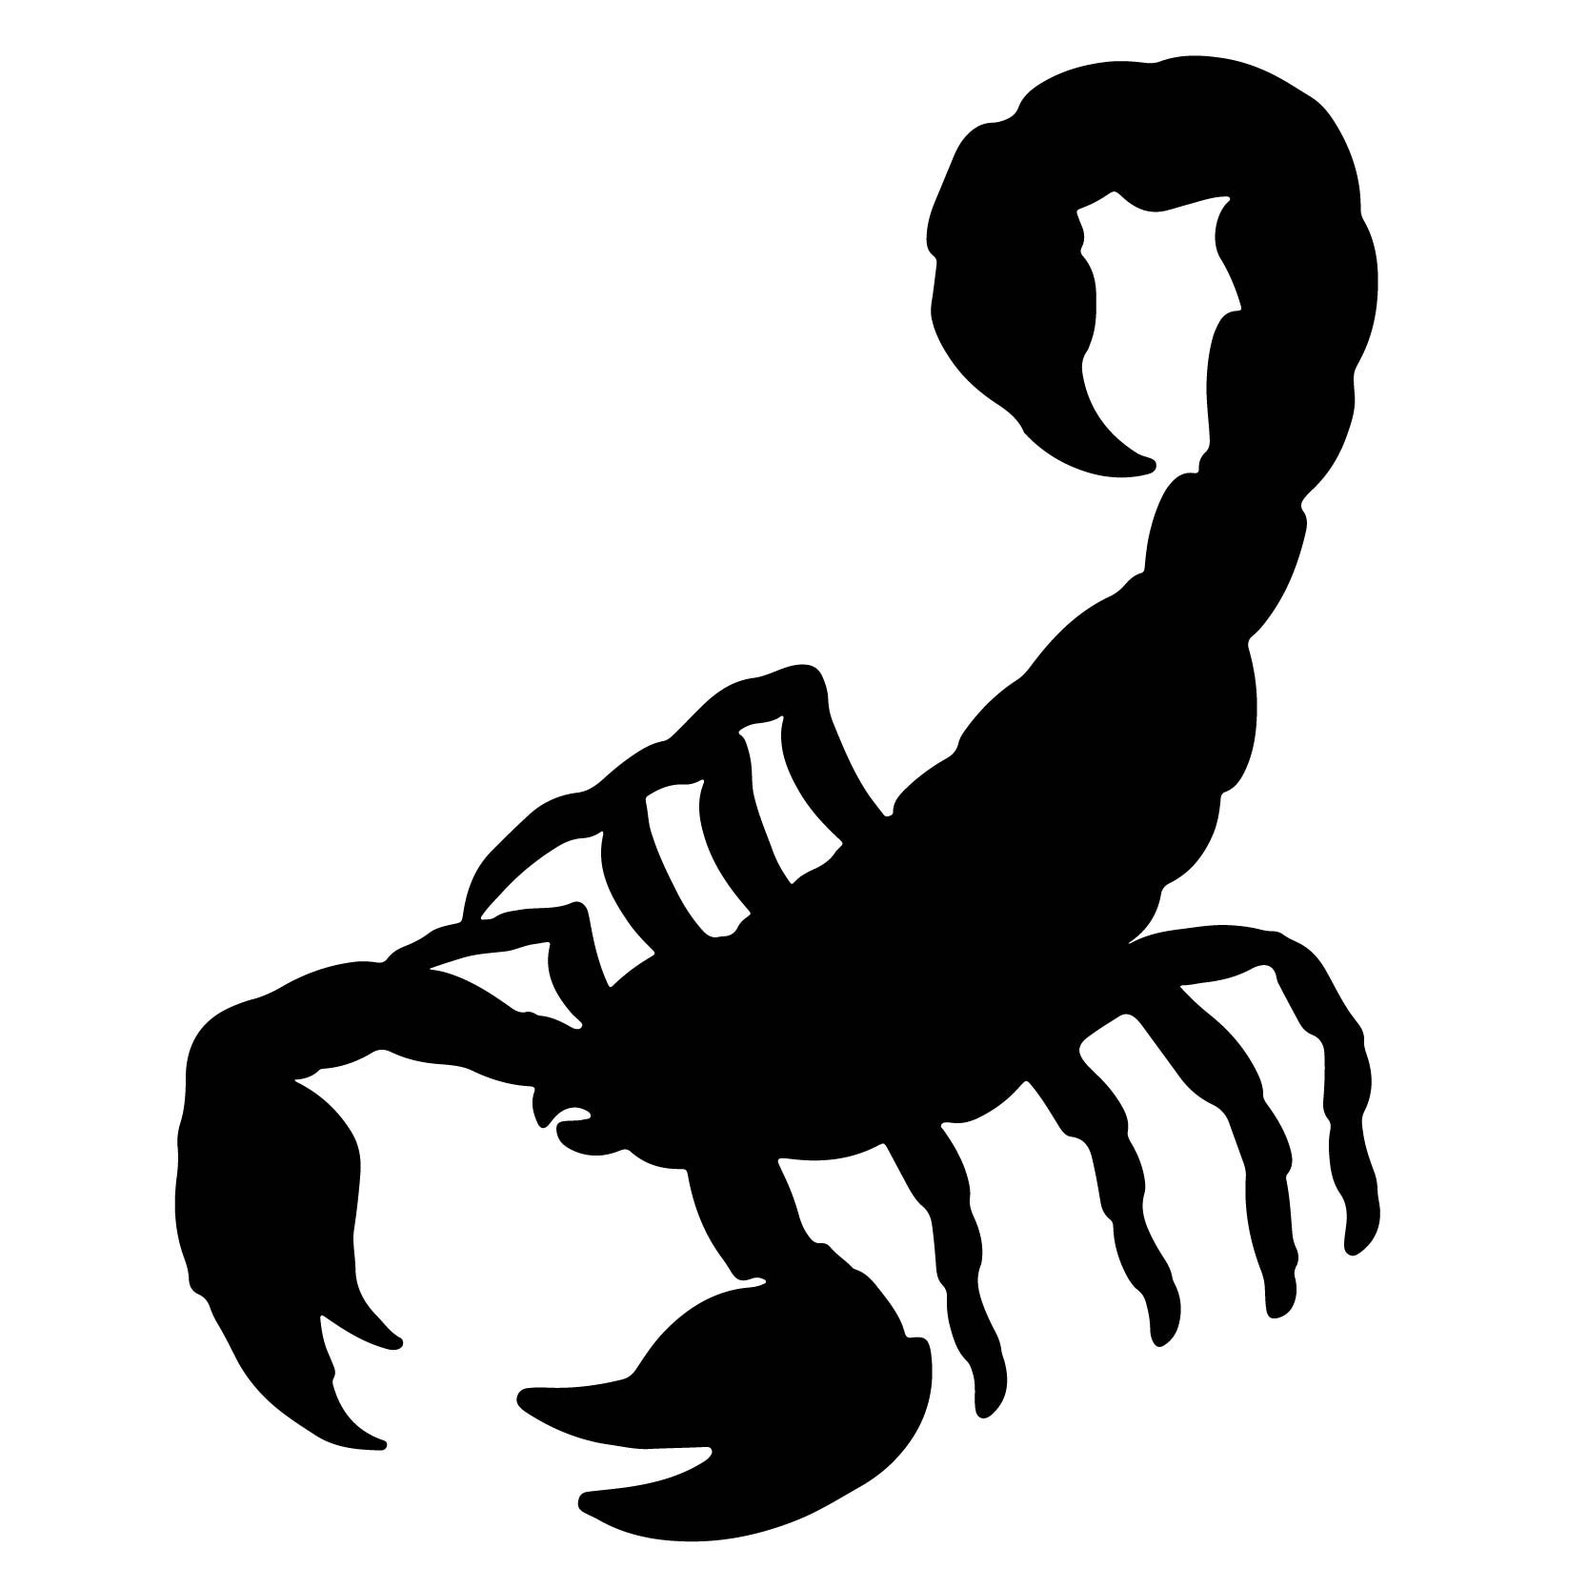 Black and white silhouette of a scorpion.